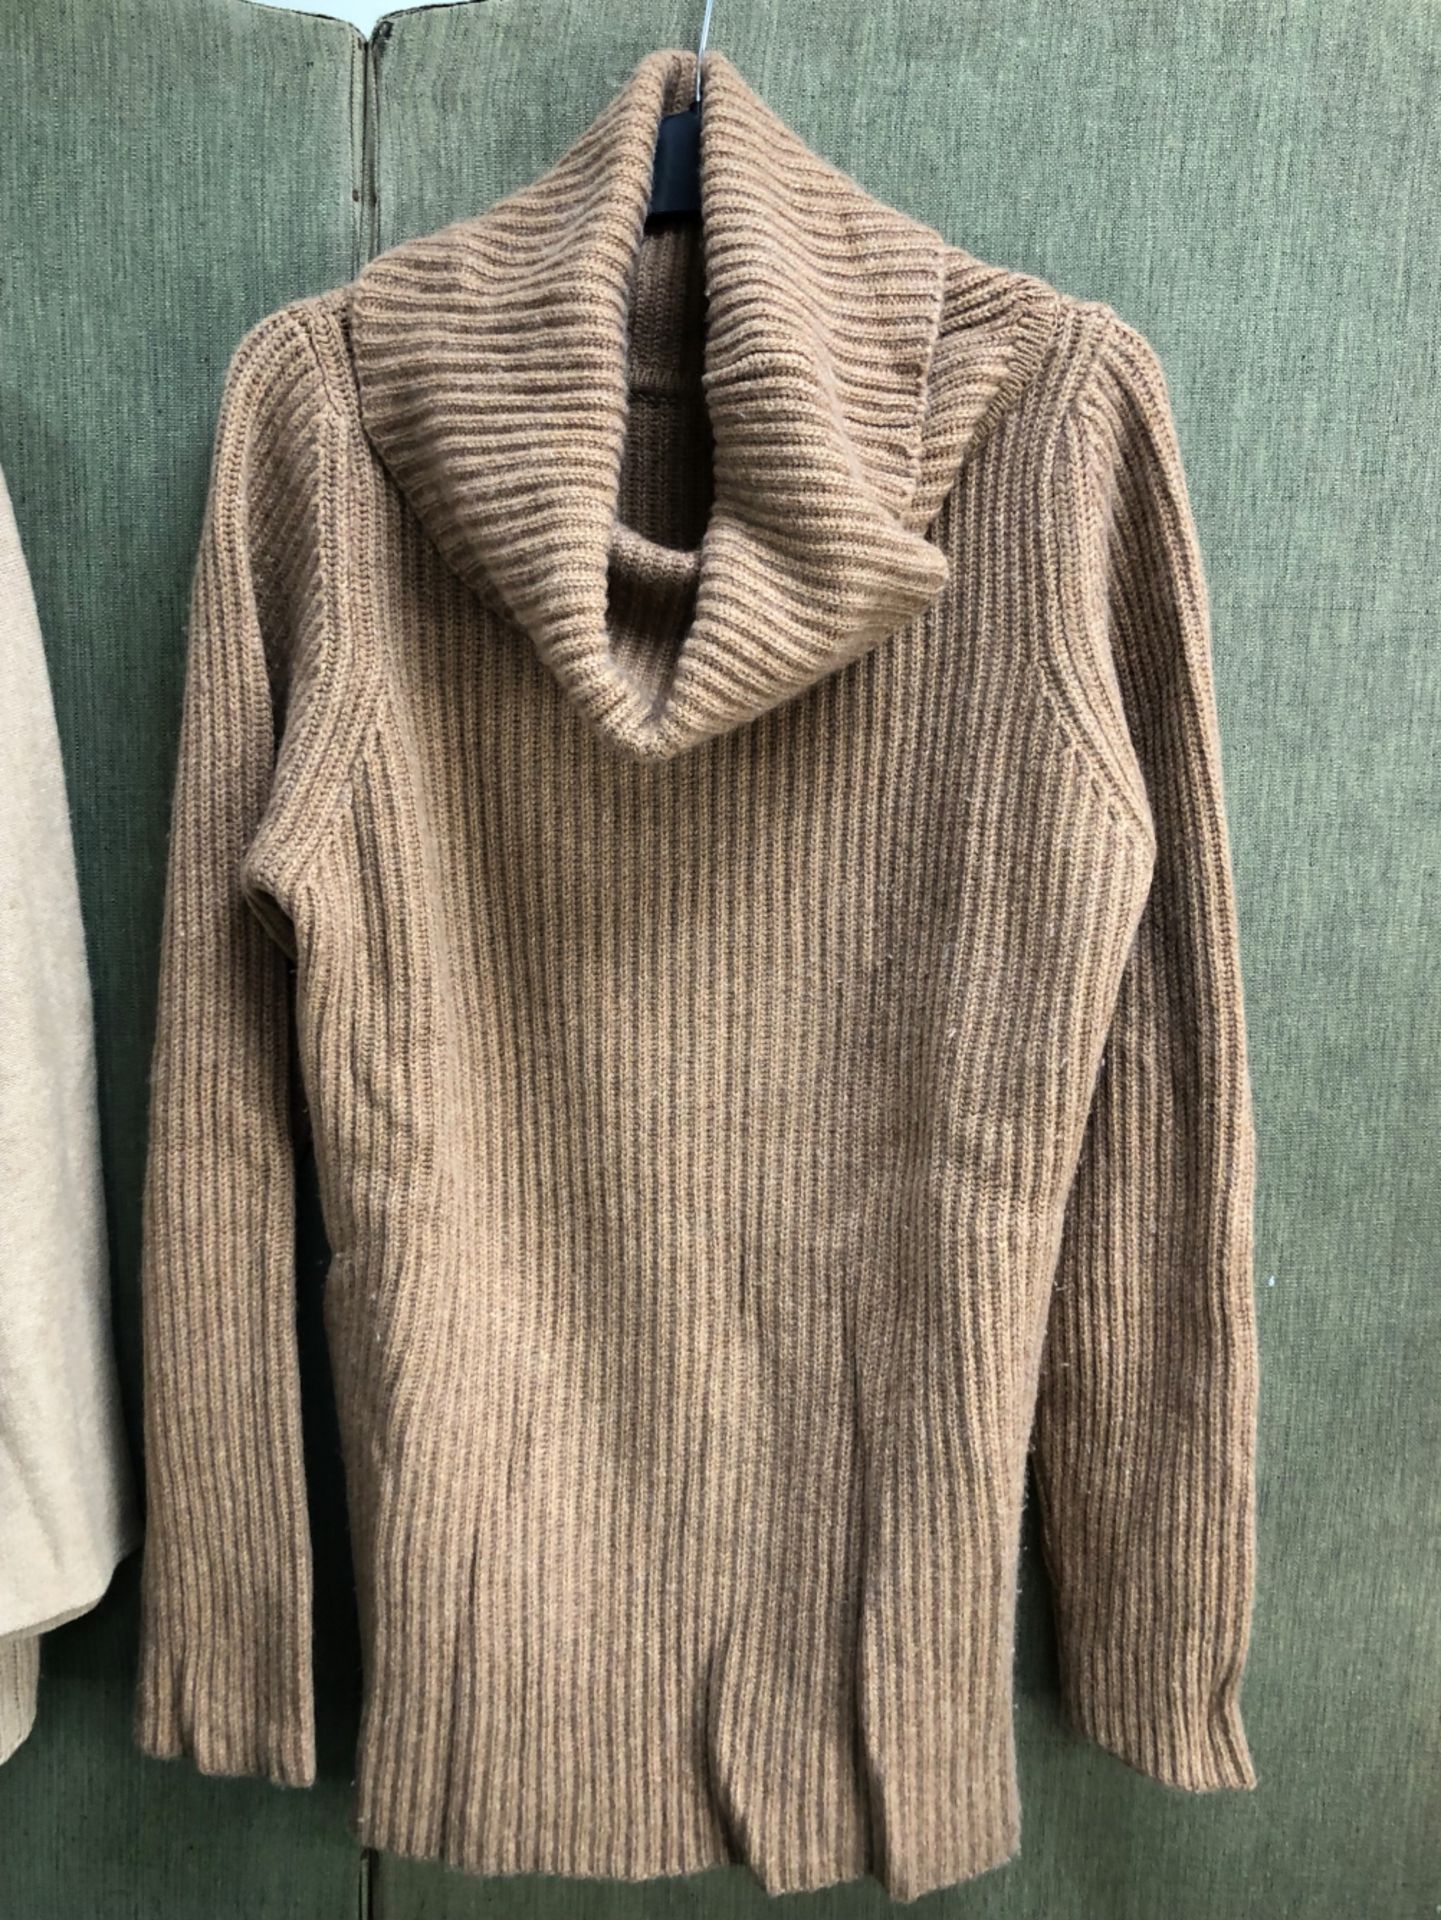 A JOHNSTONS CASHMERE 44" CABLE KNIT CARDIGAN, A KNITTED CARDIGAN WITH NECK TIE, A TSE CASHMERE - Bild 10 aus 16